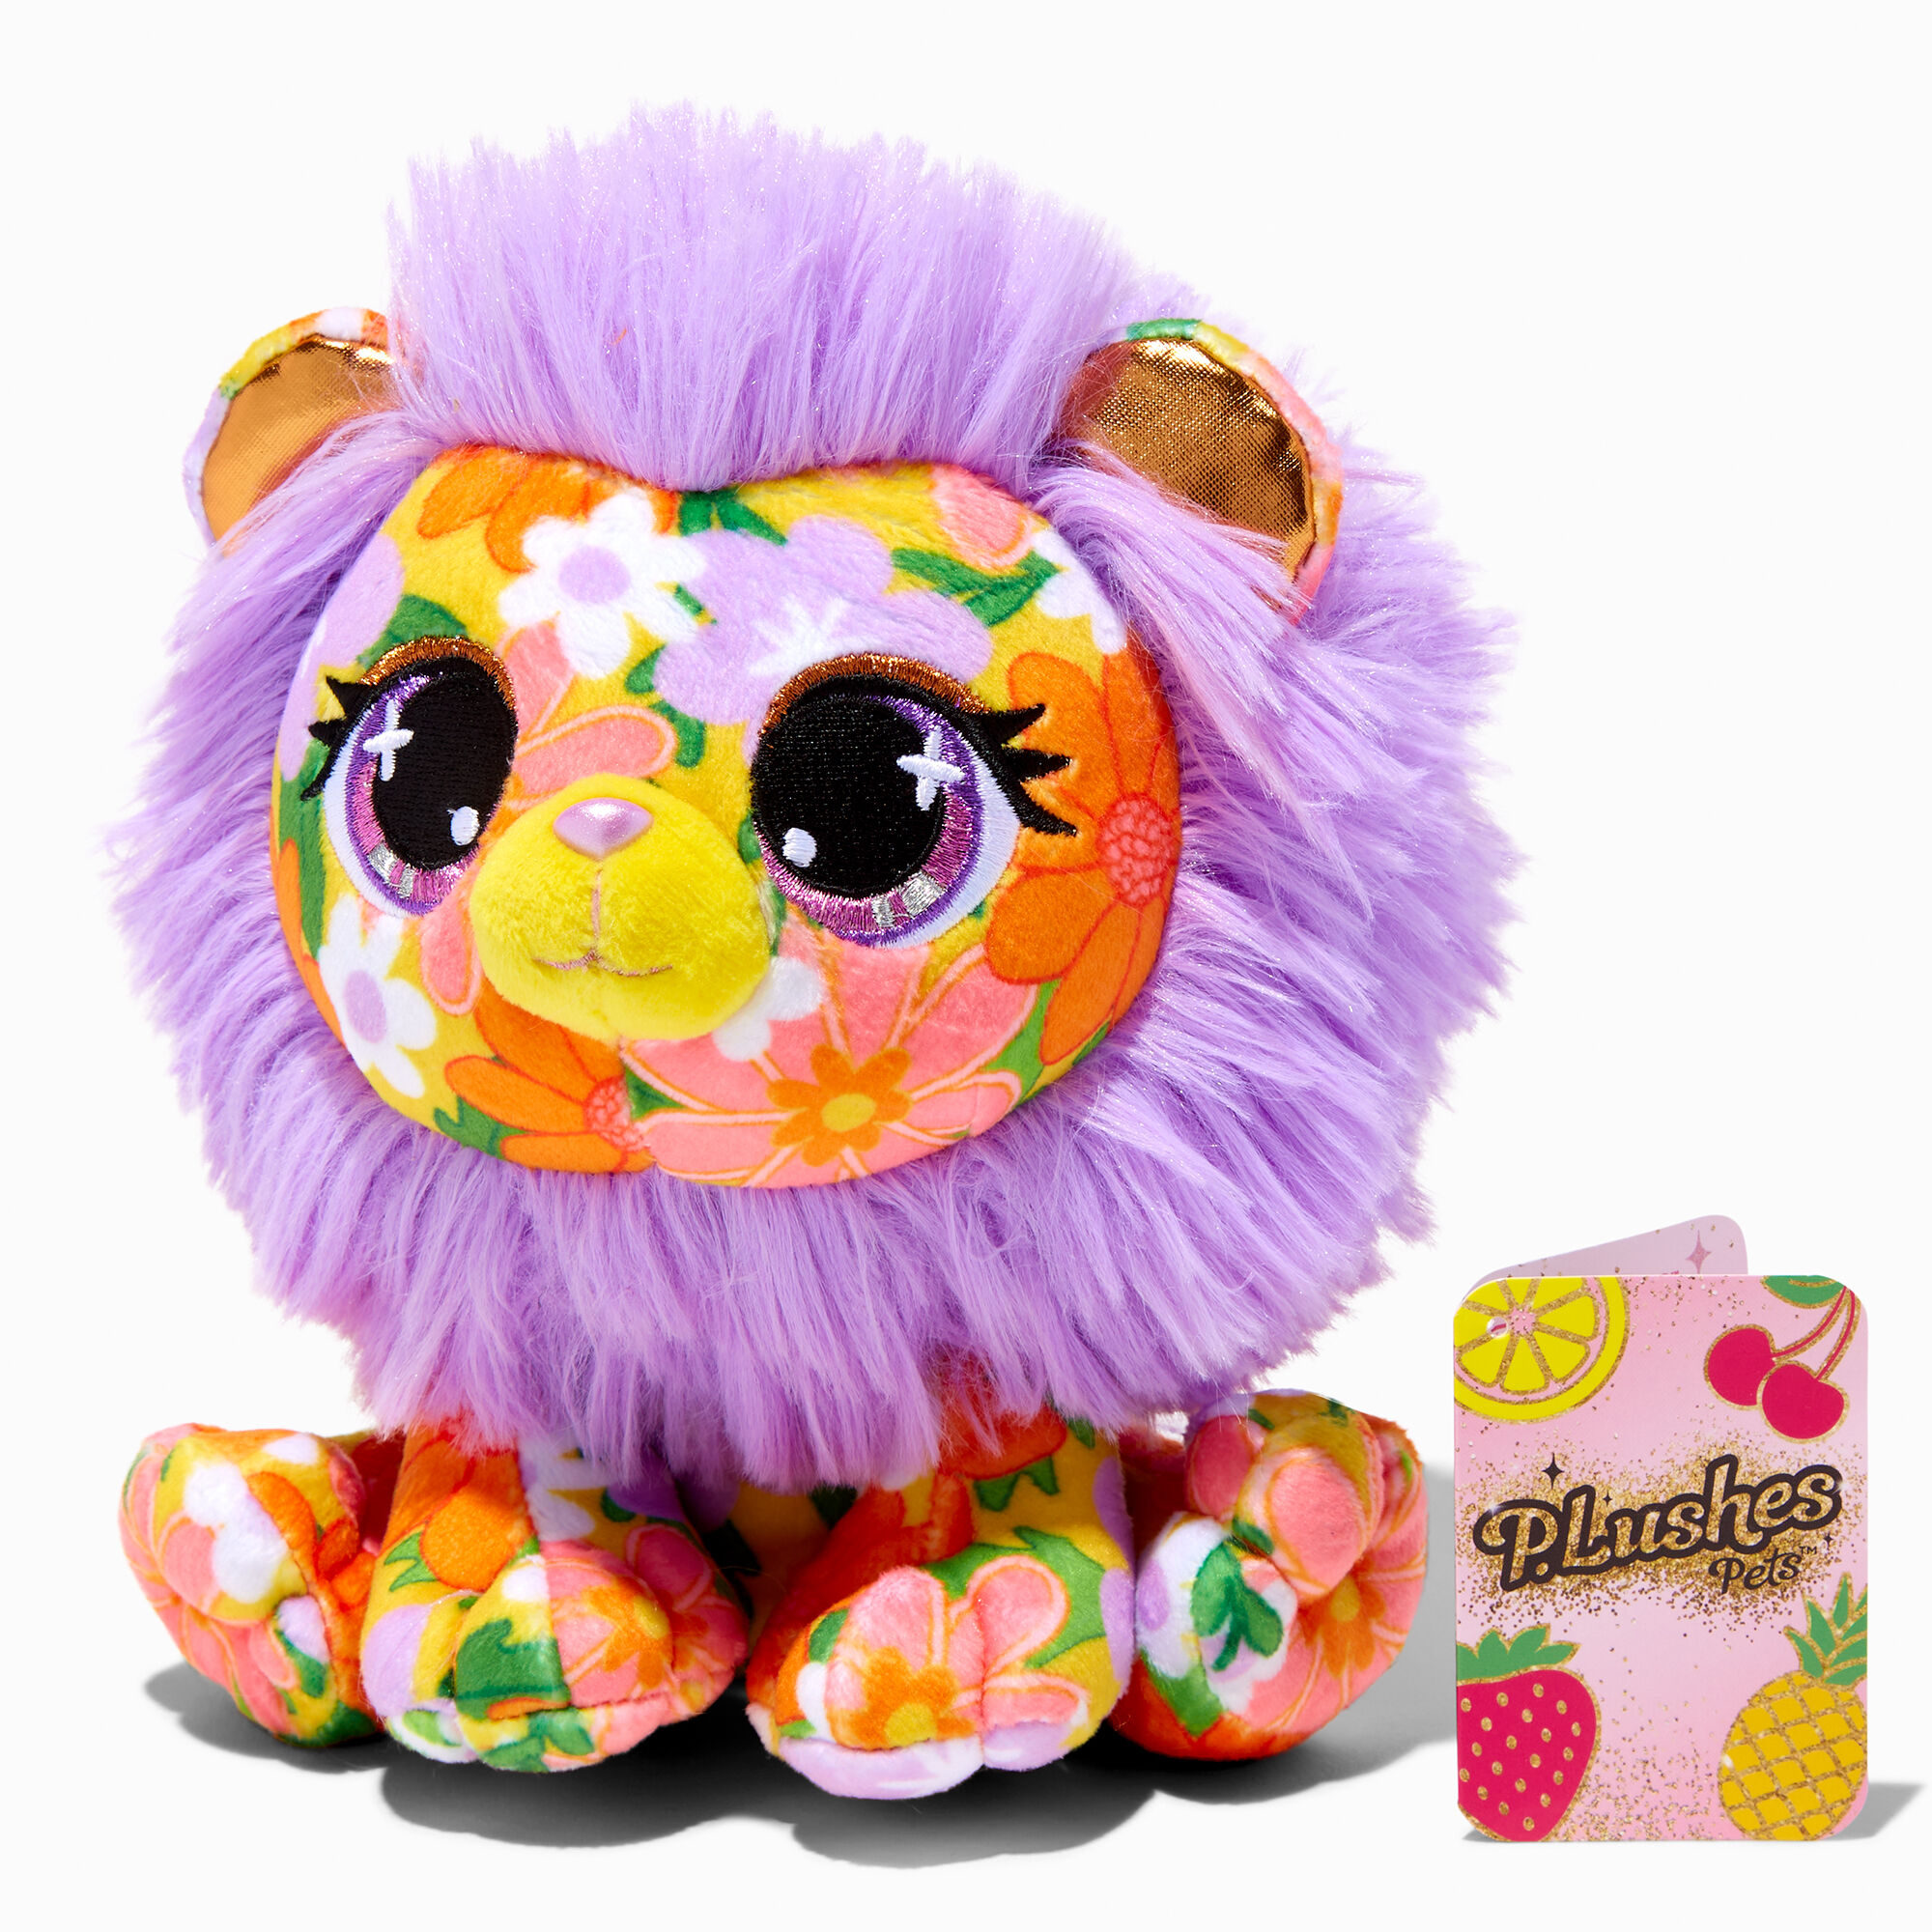 View Claires Plushes Pets Juicy Jam Collection Farah Meadows Soft Toy information